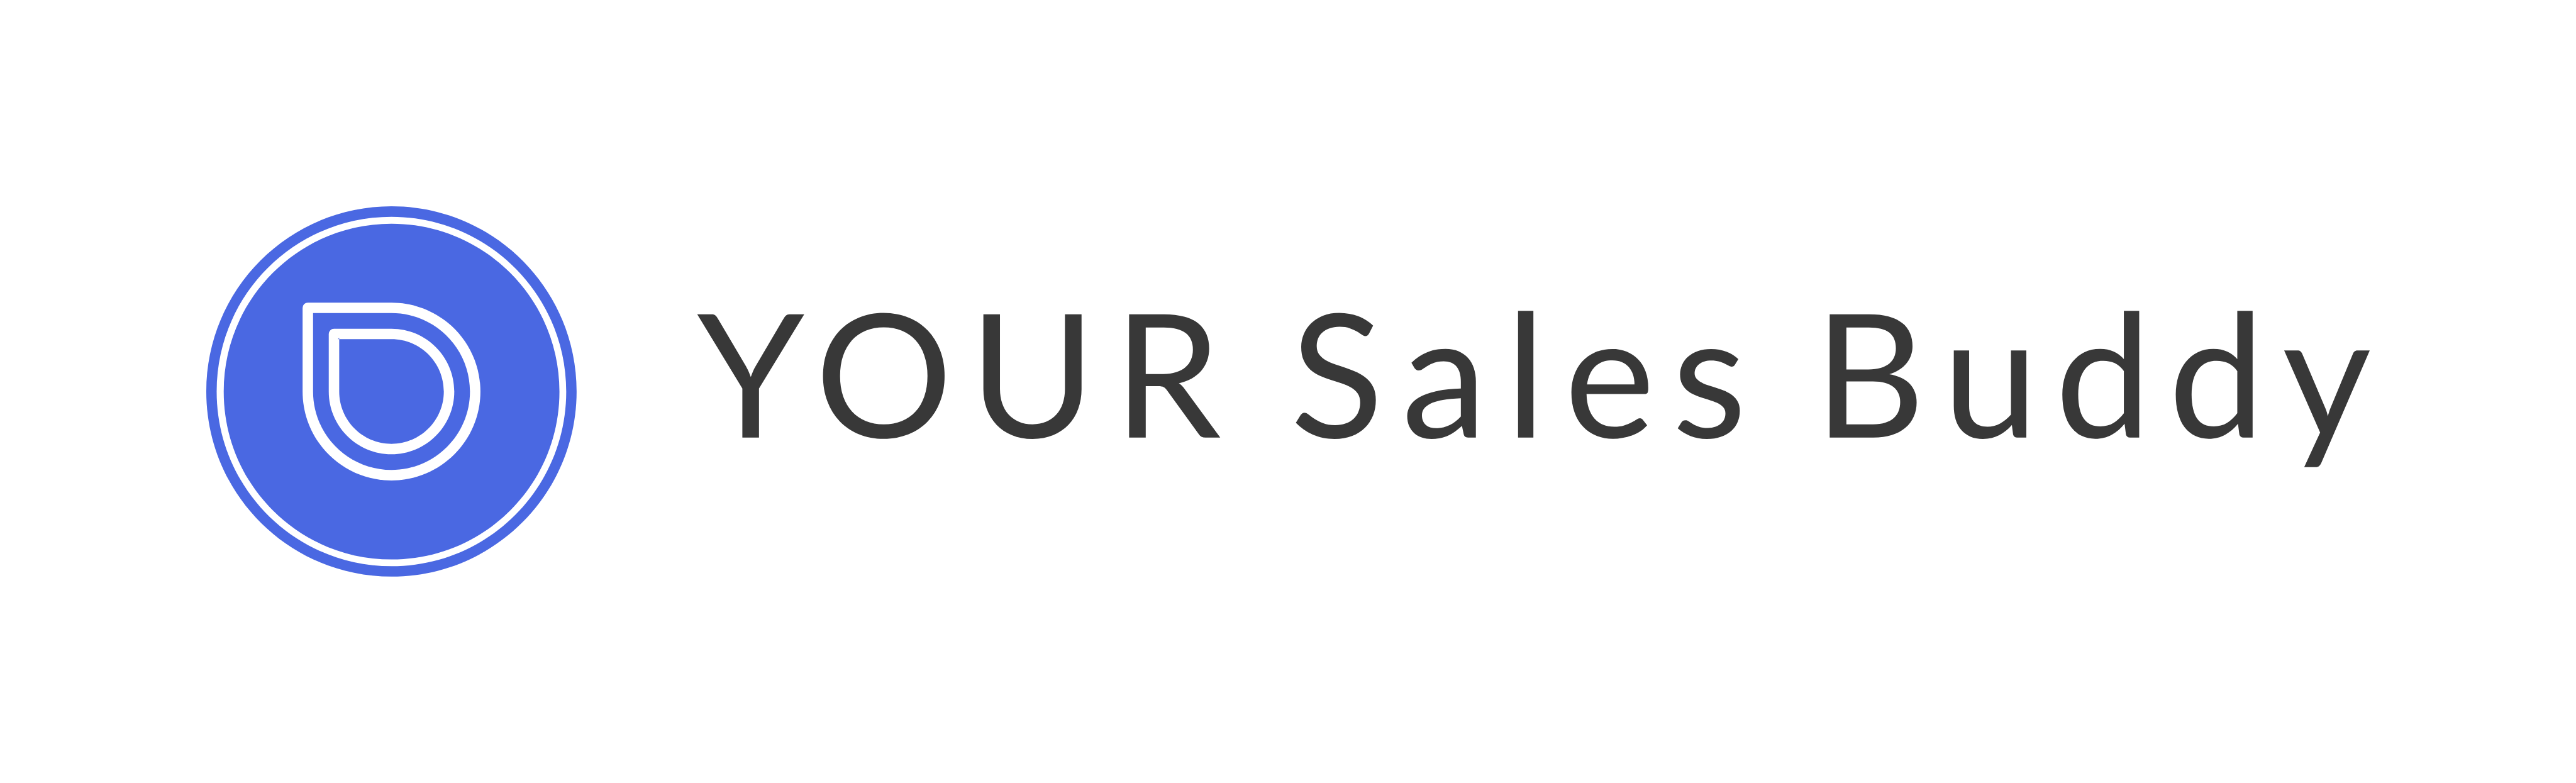 YOUR Sales Buddy